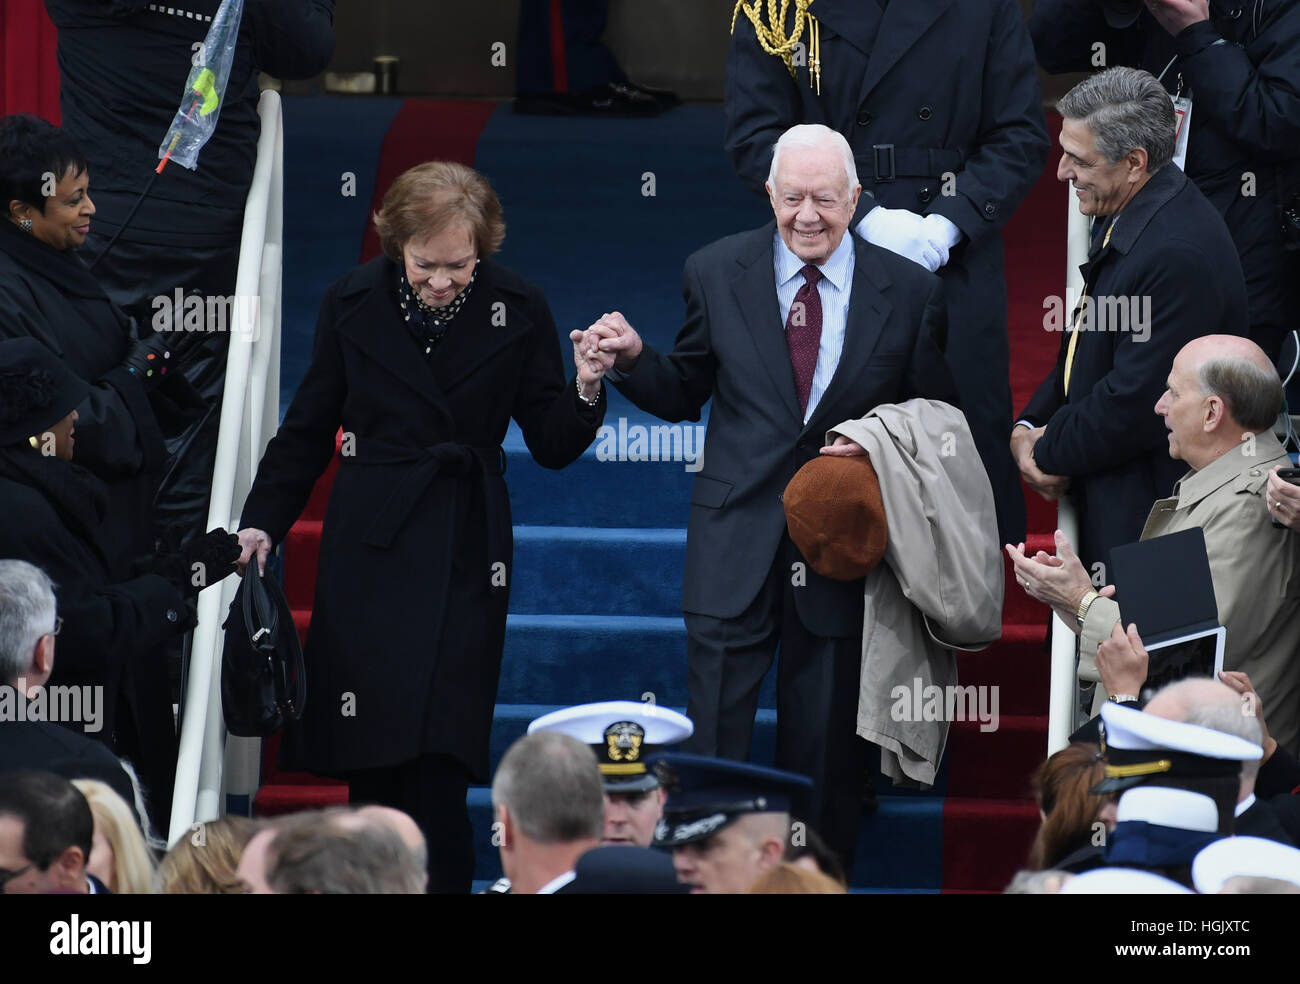 Former President Jimmy Carter and wife Rosalynn walk down the steps during the Inauguration Ceremony of President Donald Trump on the West Front of the U.S. Capitol on January 20, 2017 in Washington, DC Trump became the 45th President of the United States. Photo by Pat Benic/UPI - NO WIRE SERVICE - Photo: Pat Benic/UPI/Consolidated/dpa Stock Photo